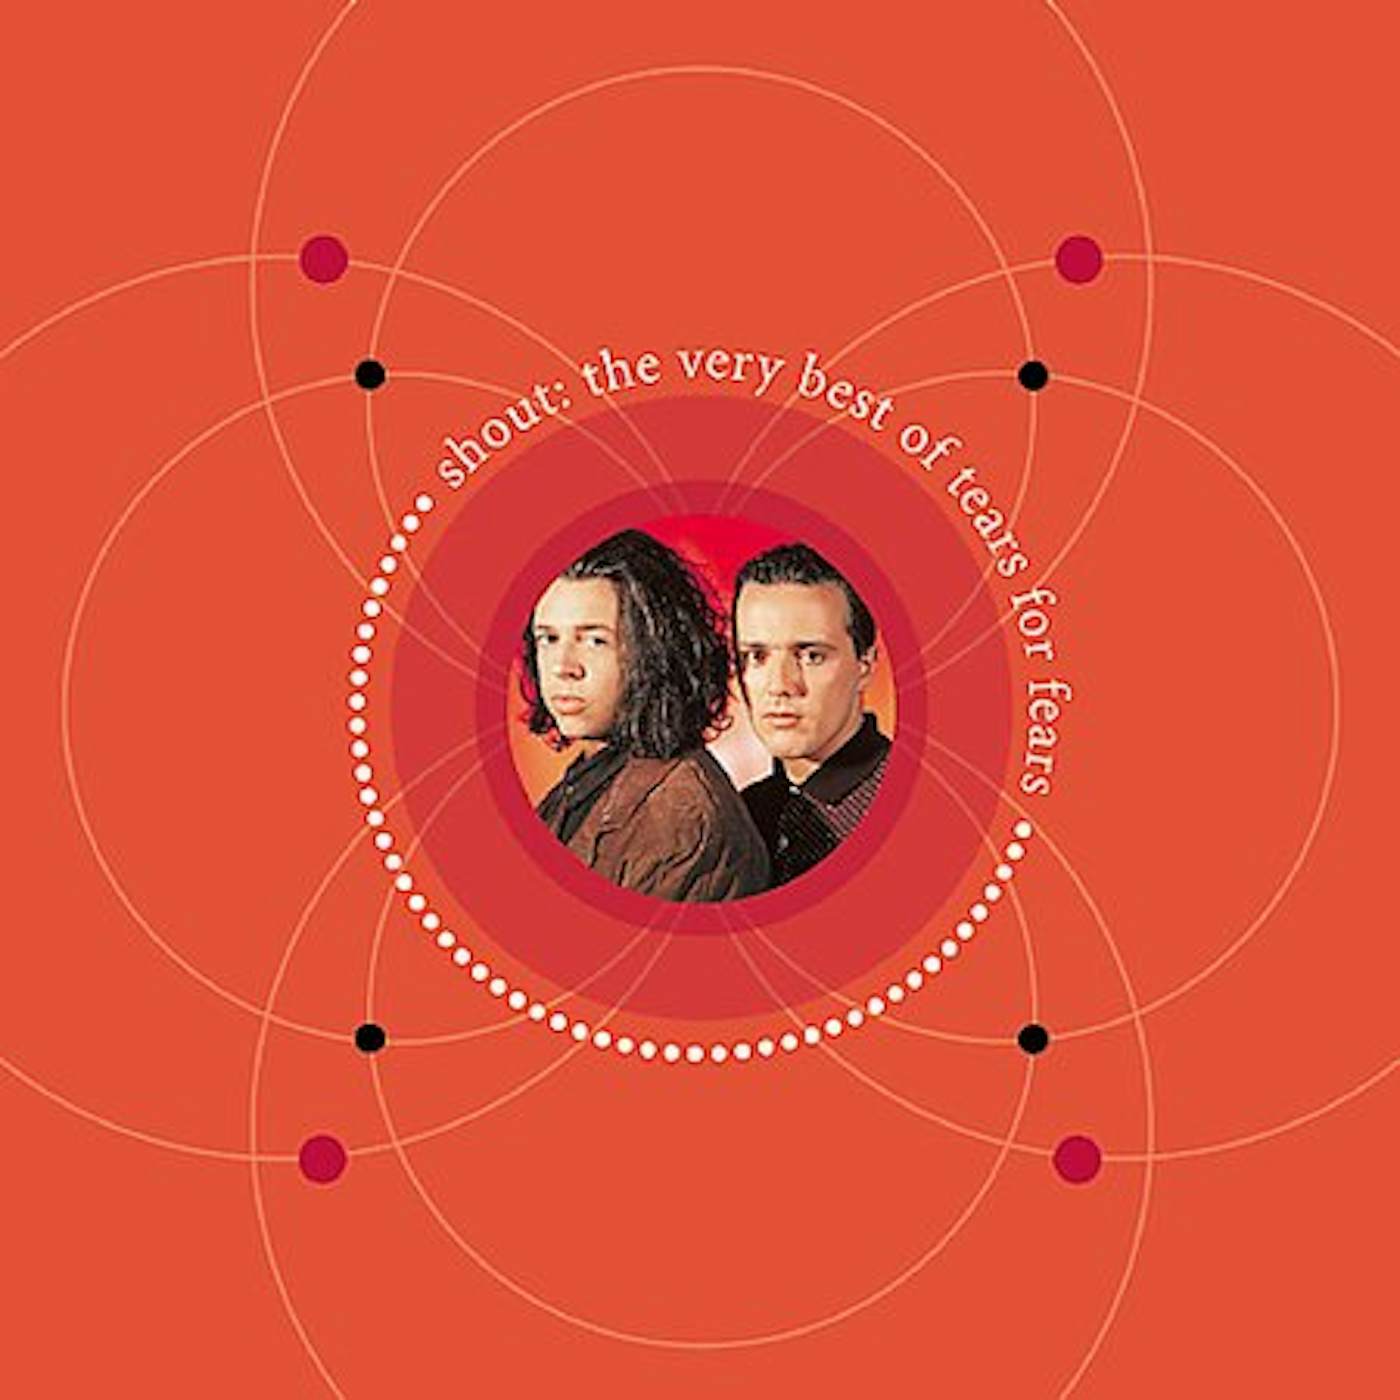 SHOUT: THE VERY BEST OF TEARS FOR FEARS CD